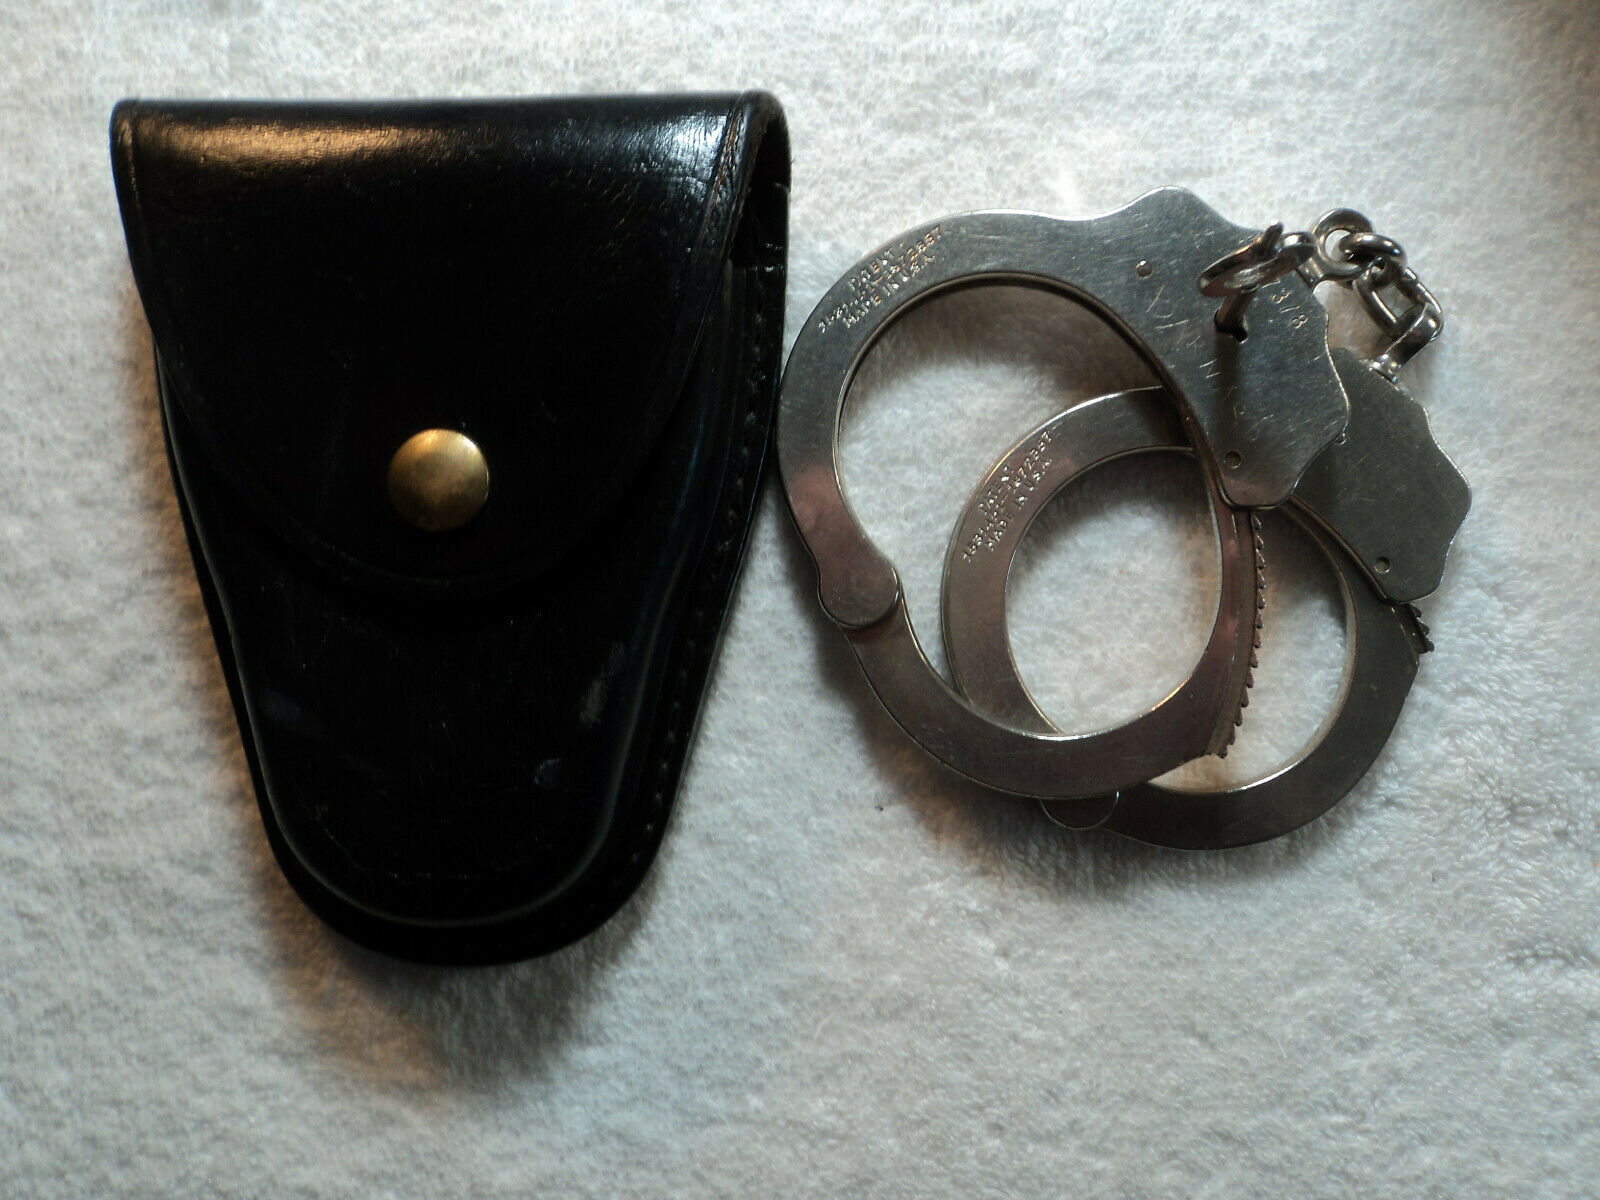 Vtg Peerless Stainless Steel Handcuffs w Gould & Goodrich Leather Case & Key USA